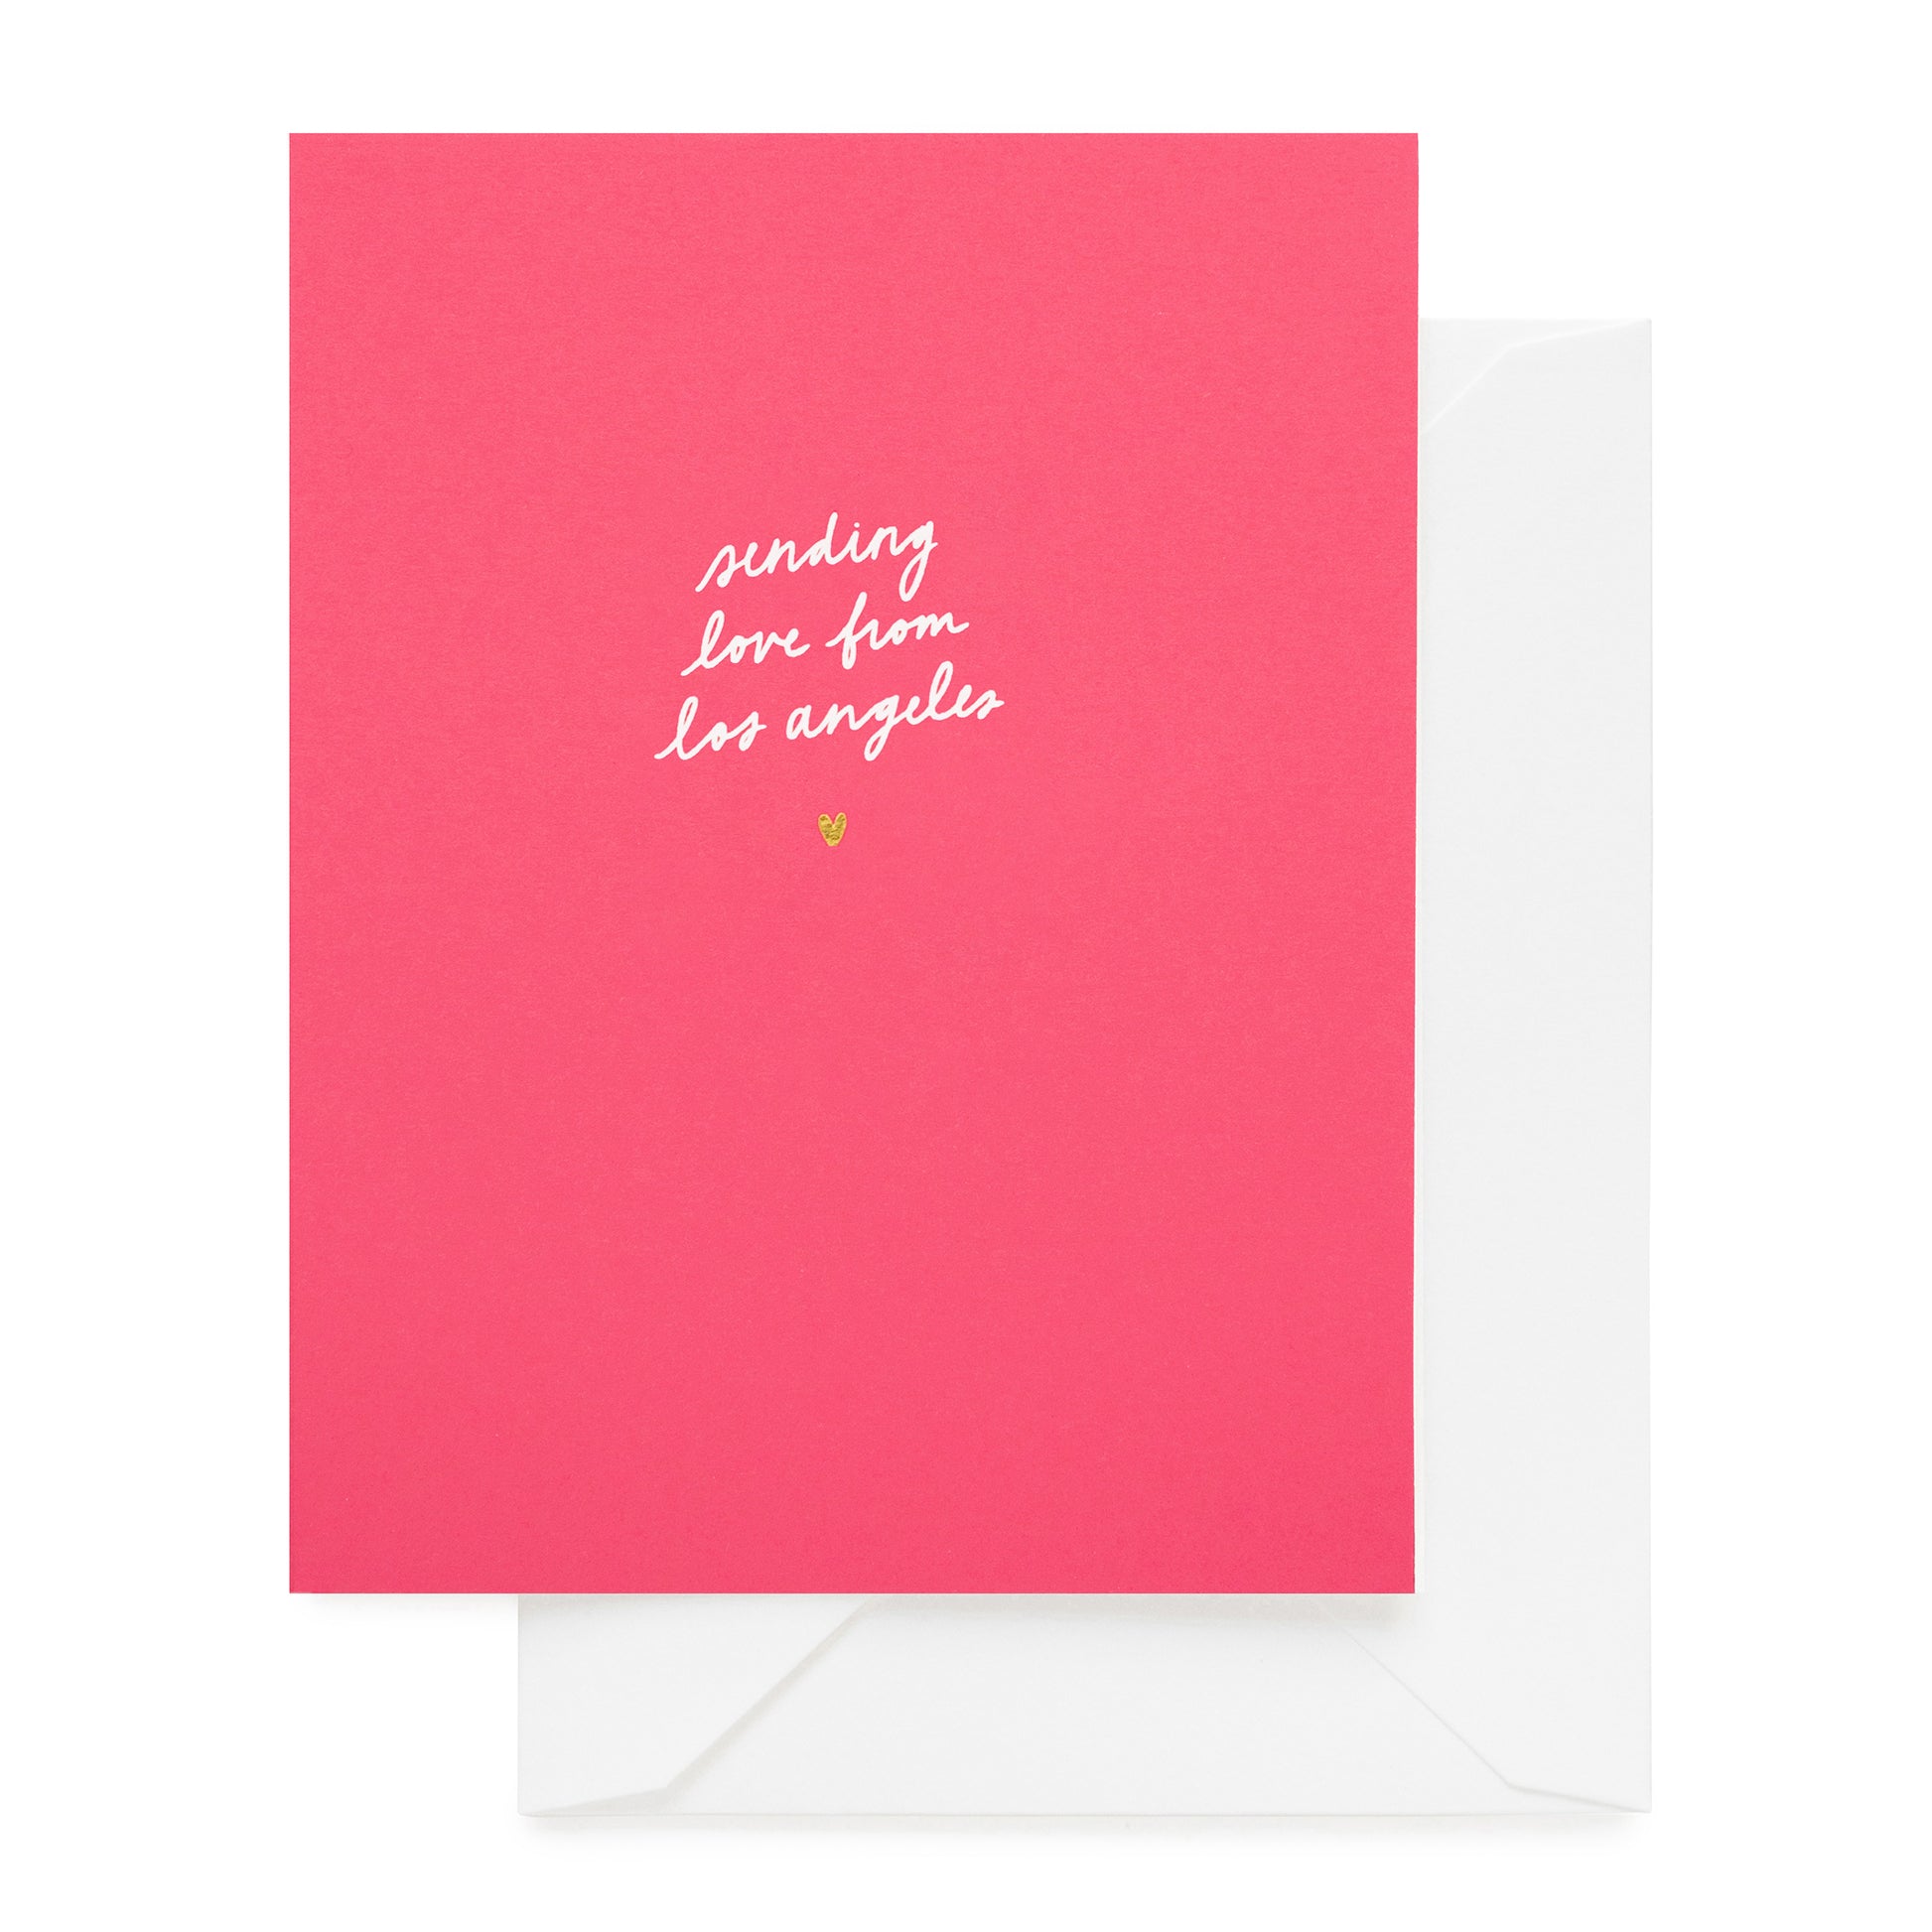 Hot pink card foil printed with sending love from los angeles and a gold heart